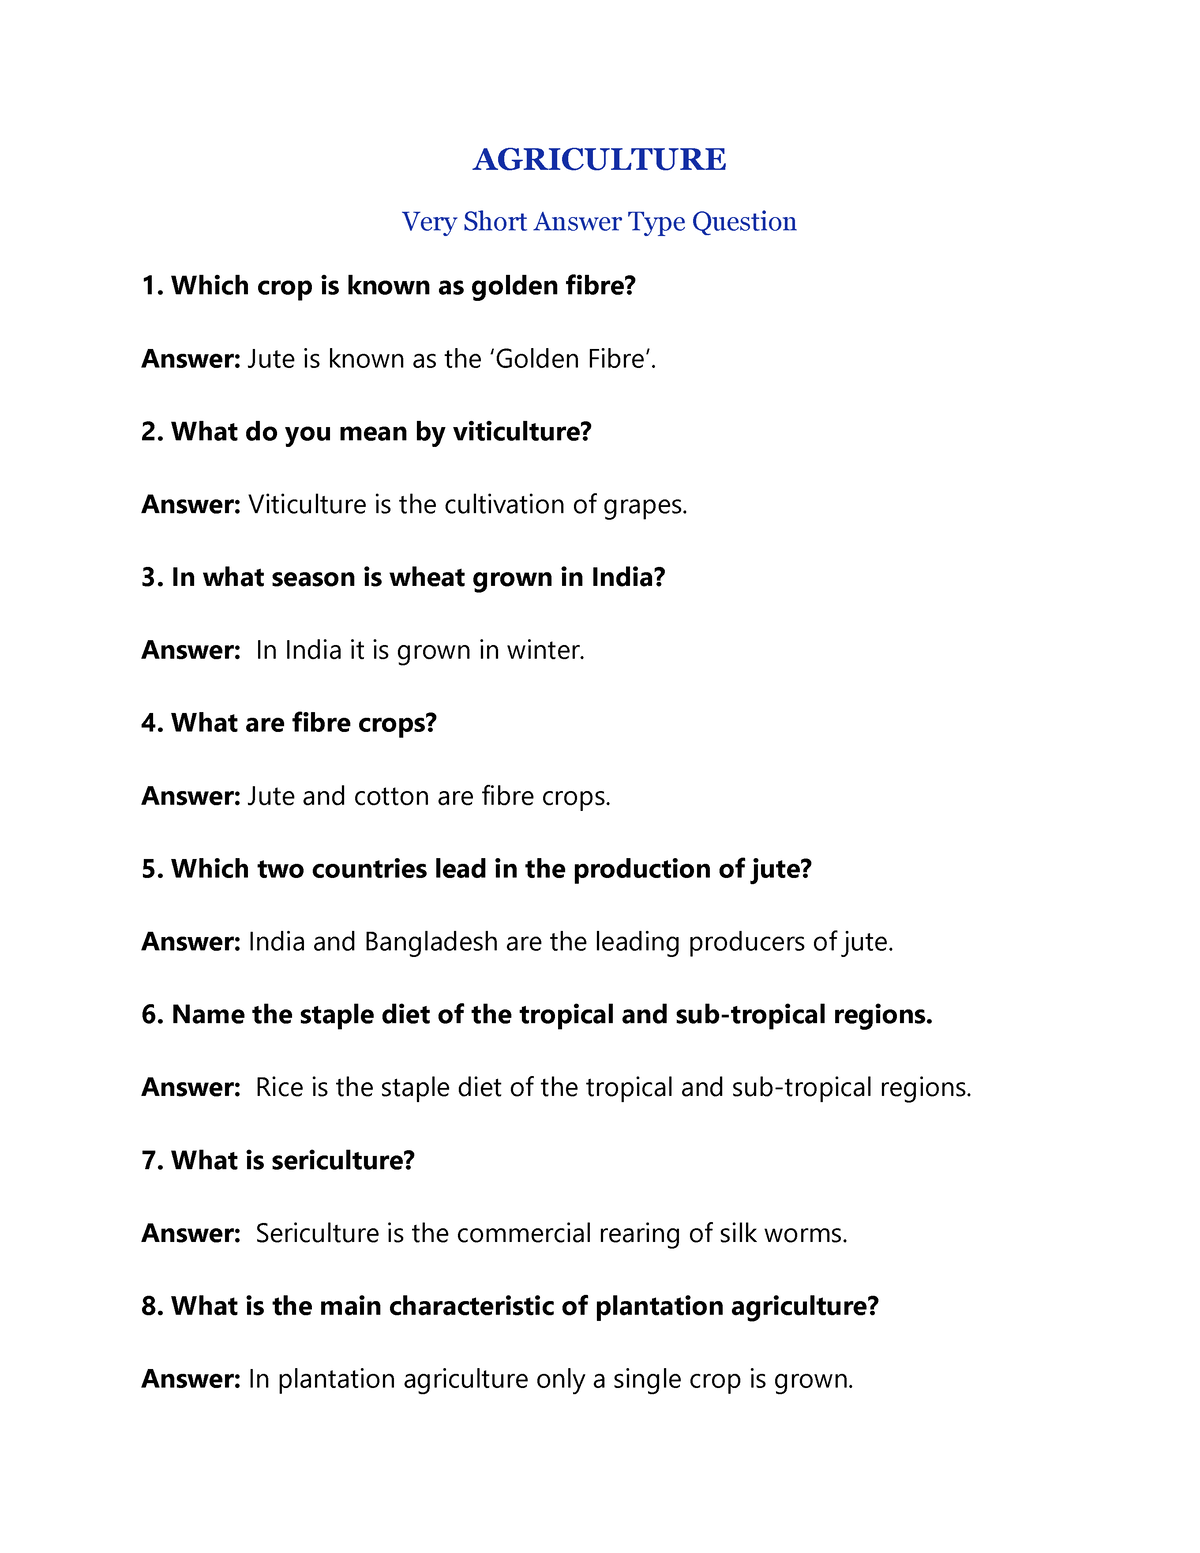 agriculture-nacfrdh-agriculture-very-short-answer-type-question